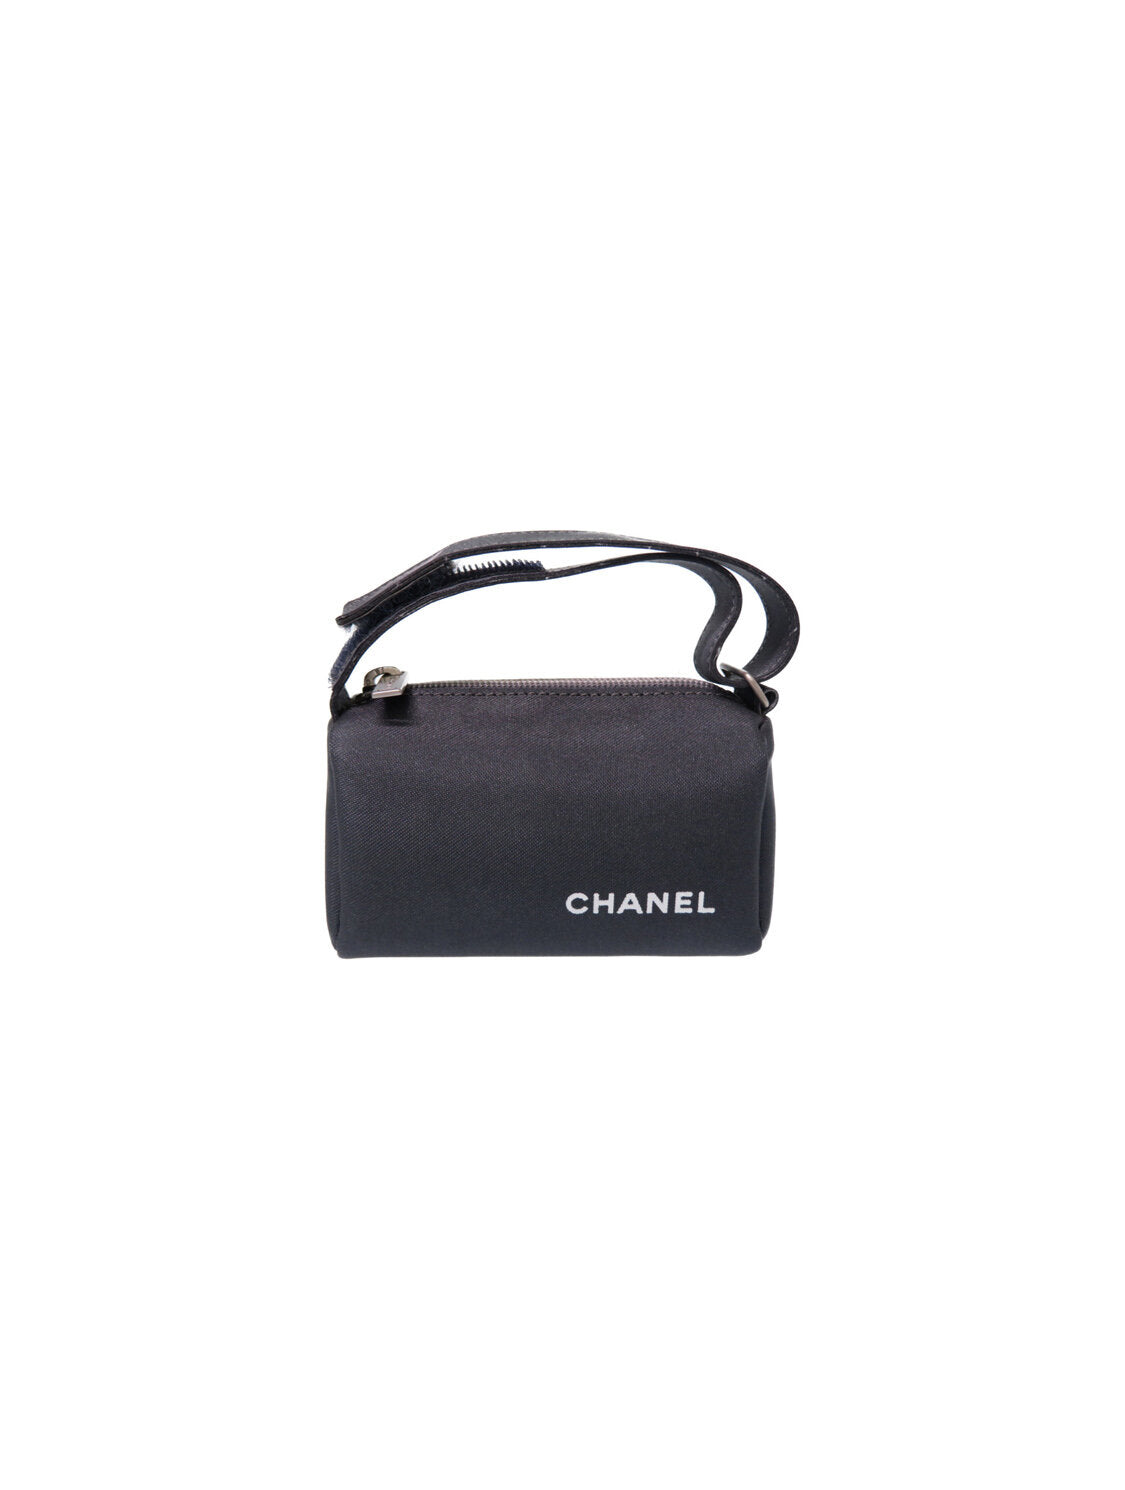 Deauville - Clutch - Chanel Pre-Owned small Diana shoulder bag